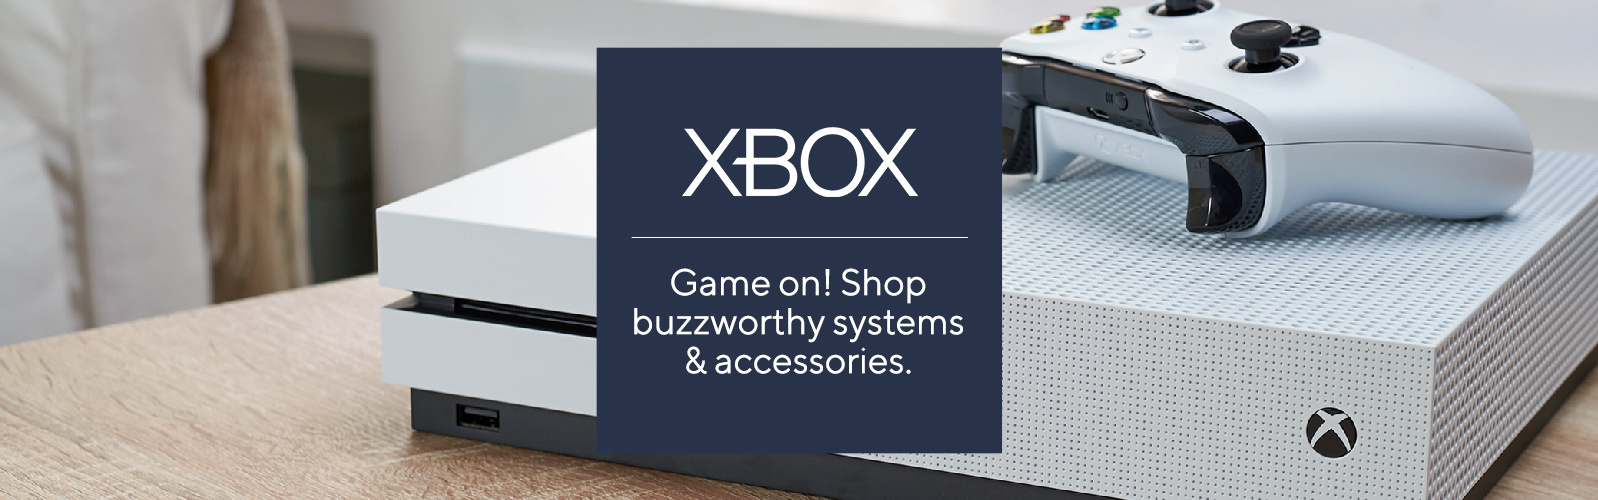 Xbox: Game on! Shop buzzworthy systems & accessories.